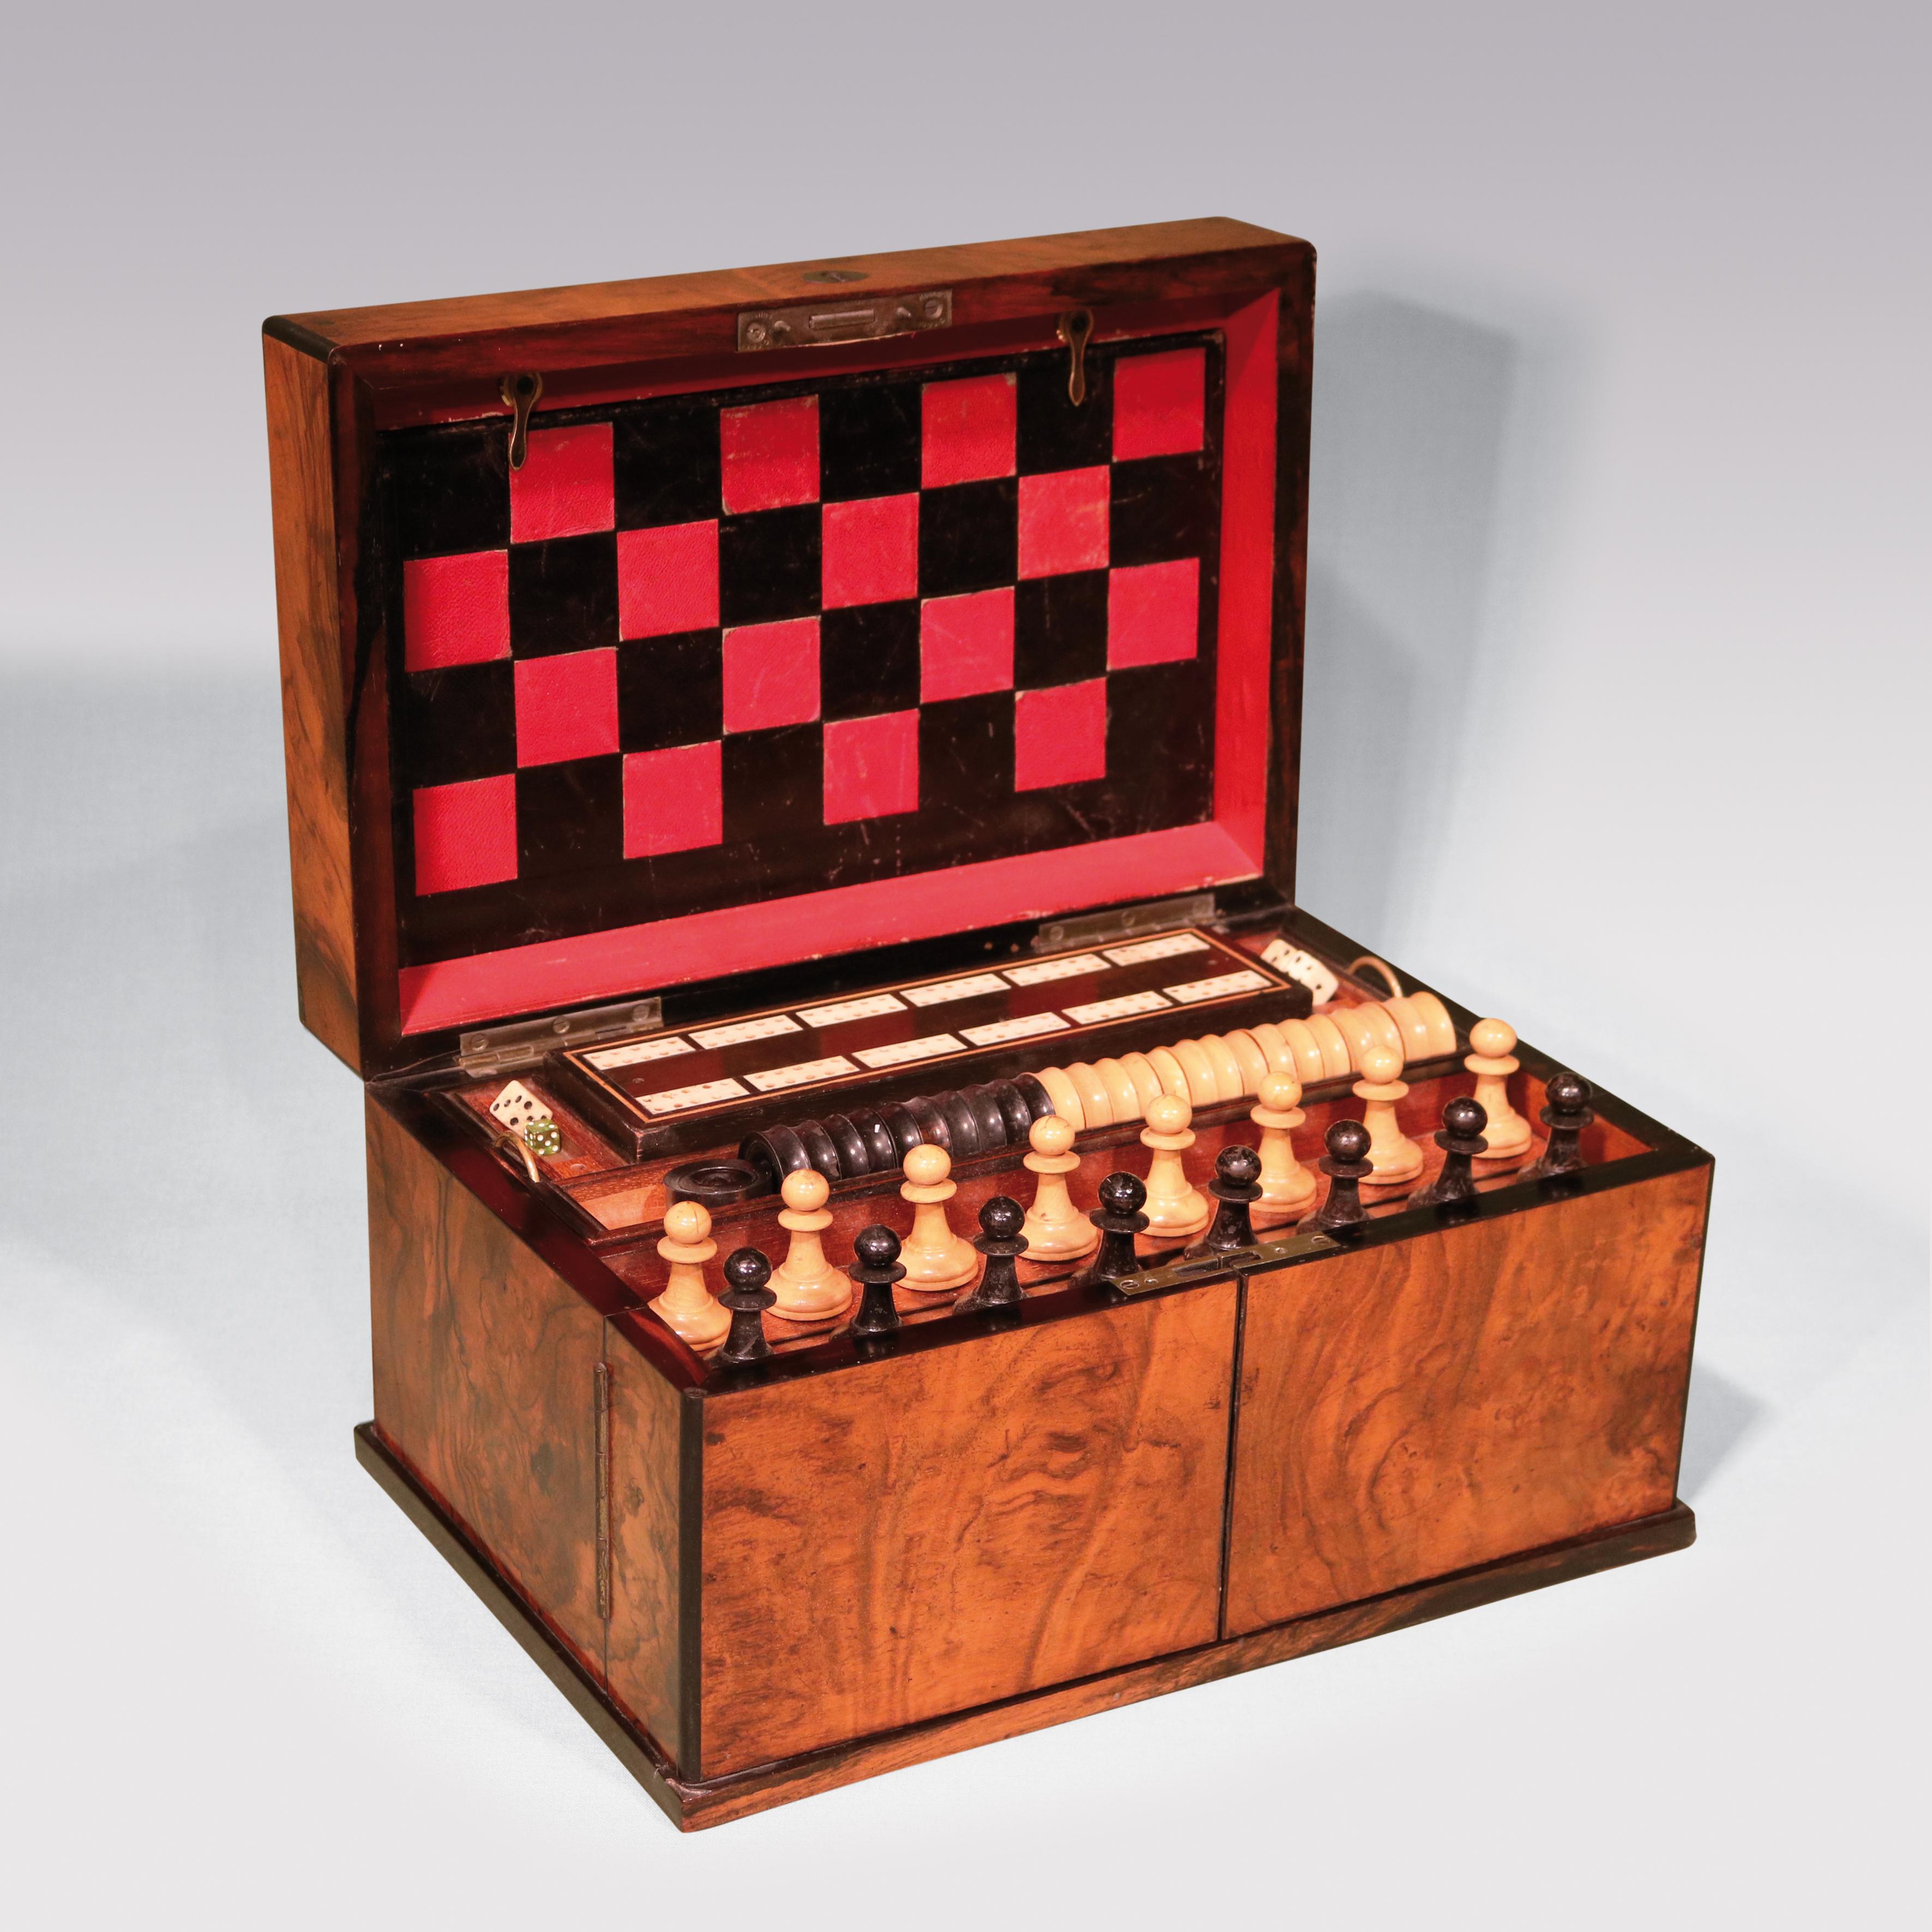 The ‘Royal Cabinet of Games’ by Charles Henry, 22 King Street, Manchester, constructed in figured walnut with coromandel edging, enclosing various games including chess, backgammon & cribbage etc. with red & black leather playing boards.